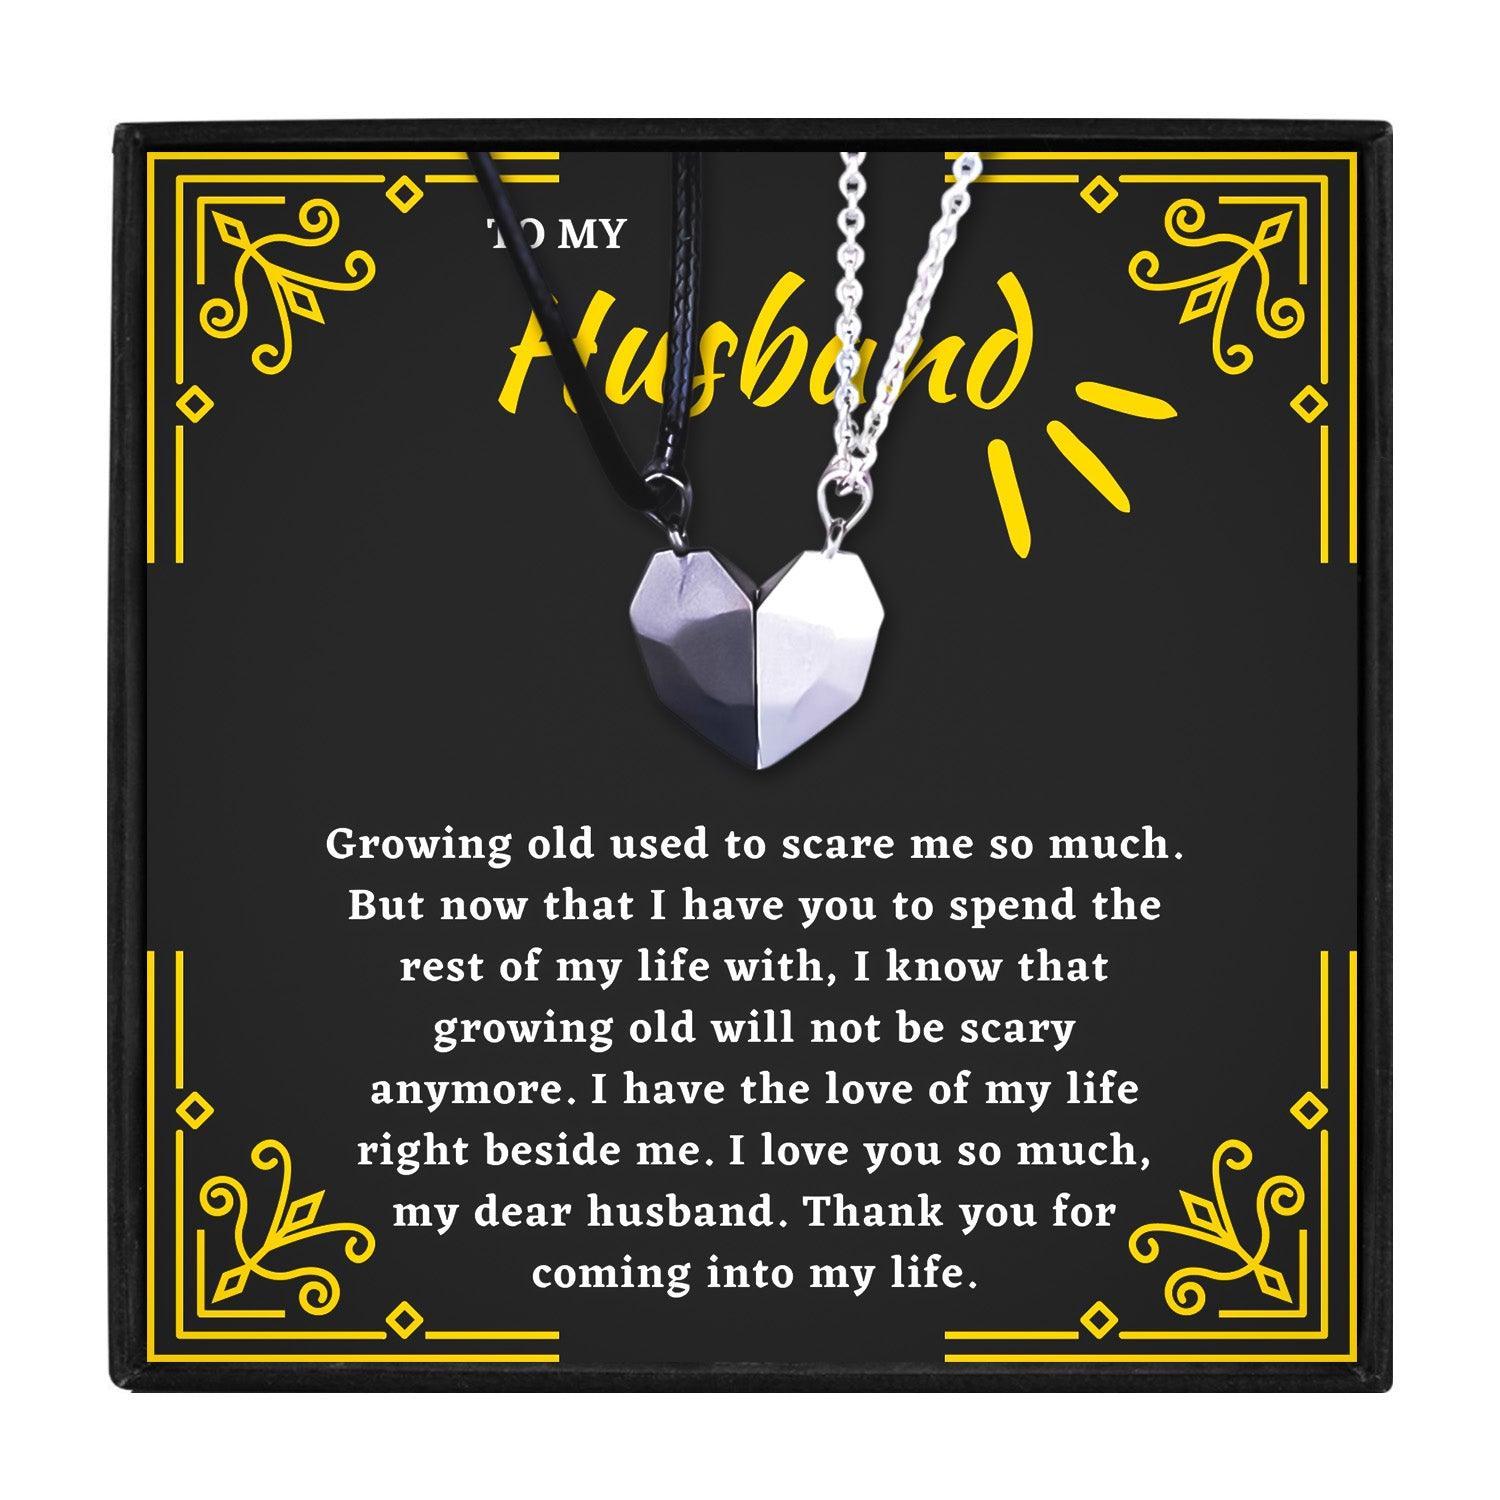 I Love My Husband Couple Necklace Gift Set From Wife in 2023 | I Love My Husband Couple Necklace Gift Set From Wife - undefined | birthday gift for hubby, birthday ideas for husband, husband gift ideas, Matching Relationship Necklaces for Husband, My Husband Necklace | From Hunny Life | hunnylife.com